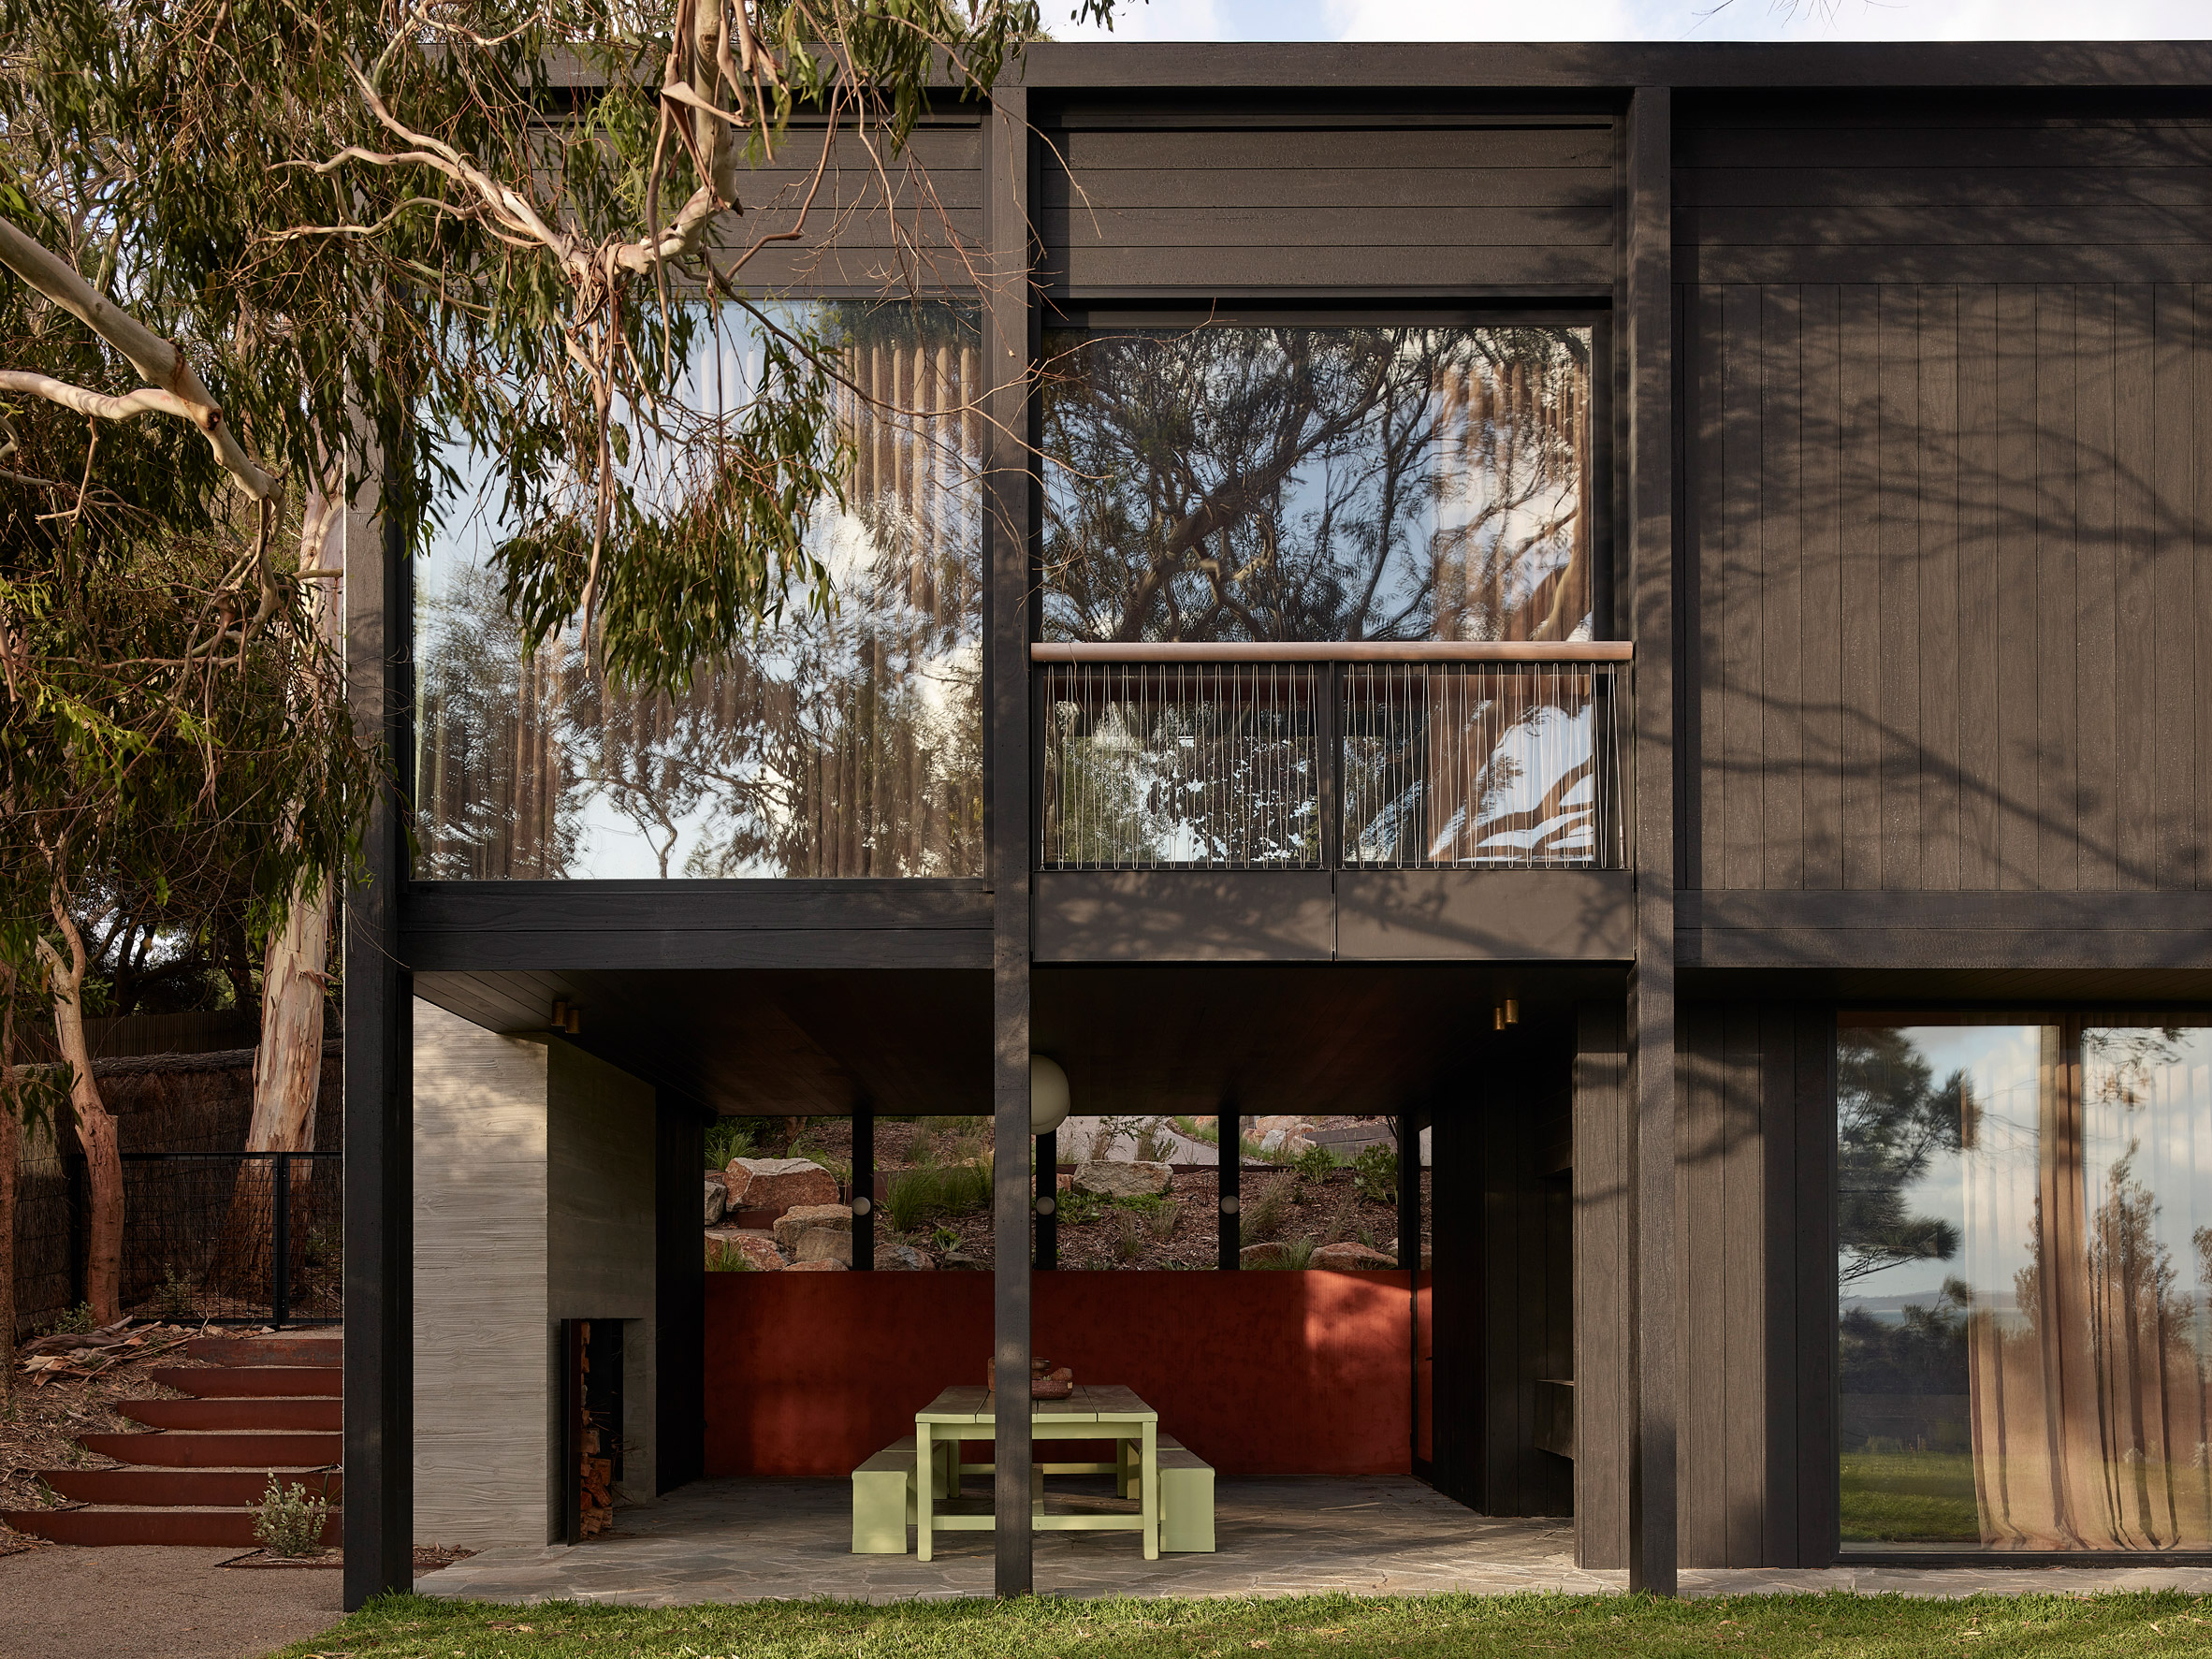 Blackened wood exterior of Somers House by Kennedy Nolan